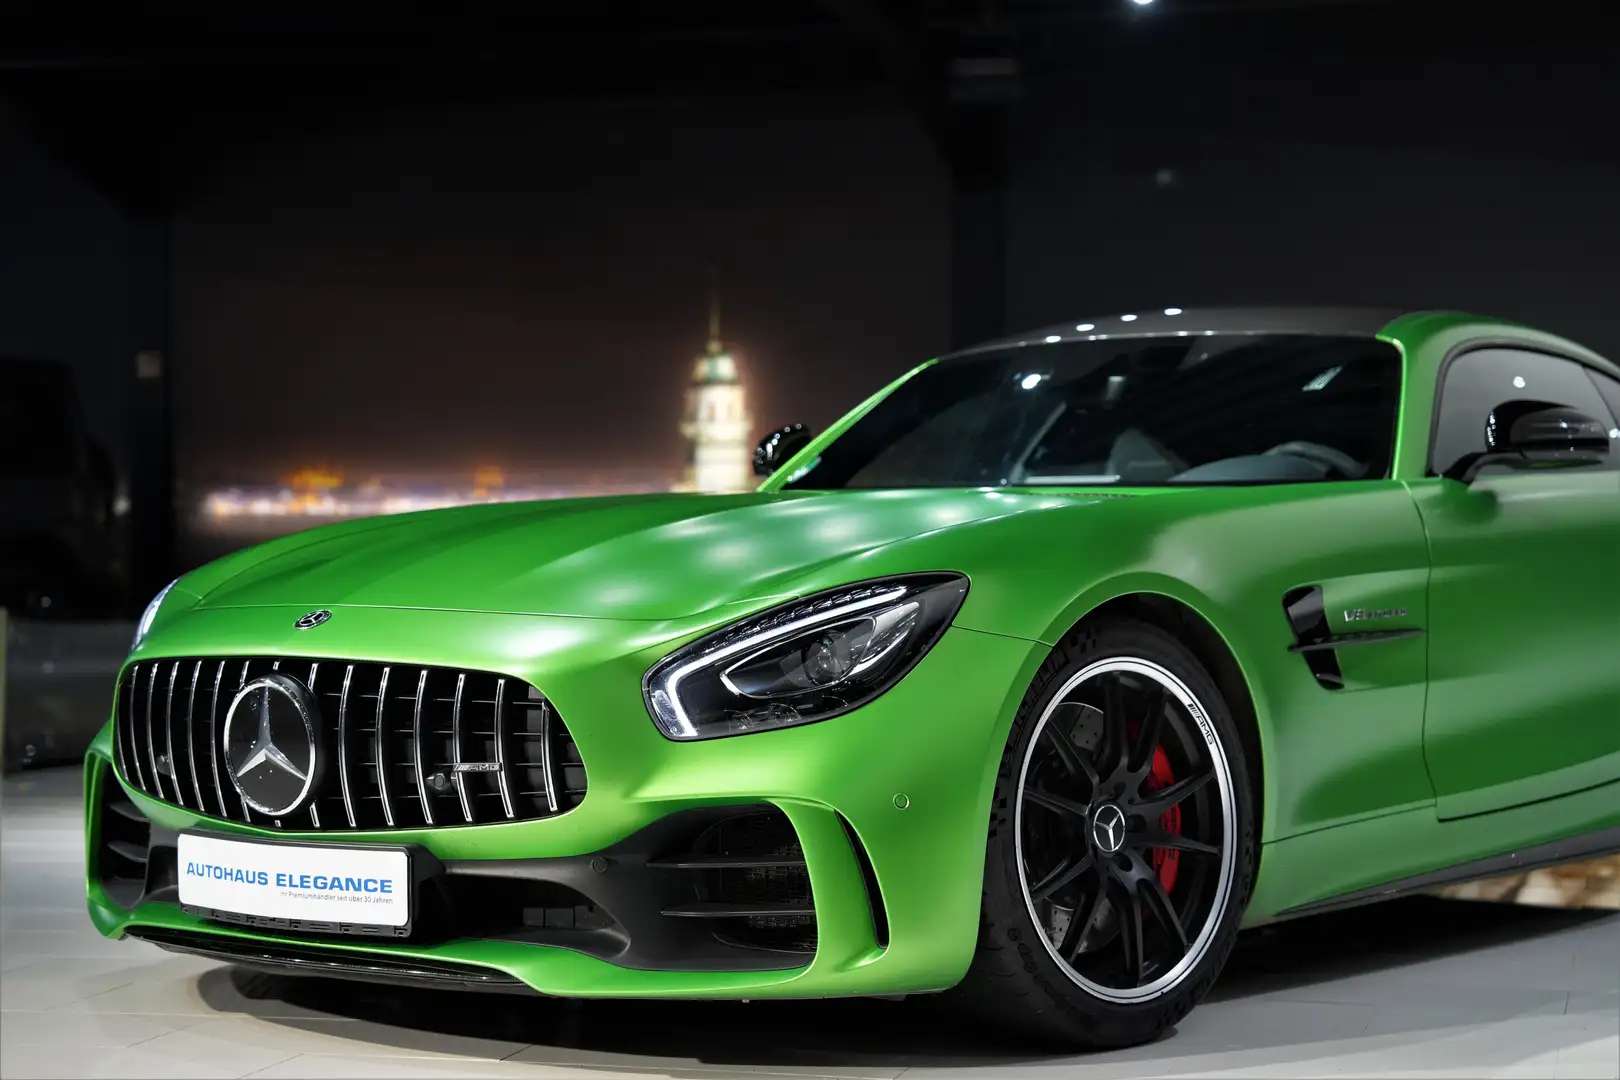 Mercedes-Benz AMG GT R Coupe*CARBON*NIGHT*NAPPA*GREEN-MAGNO*1HD - 2